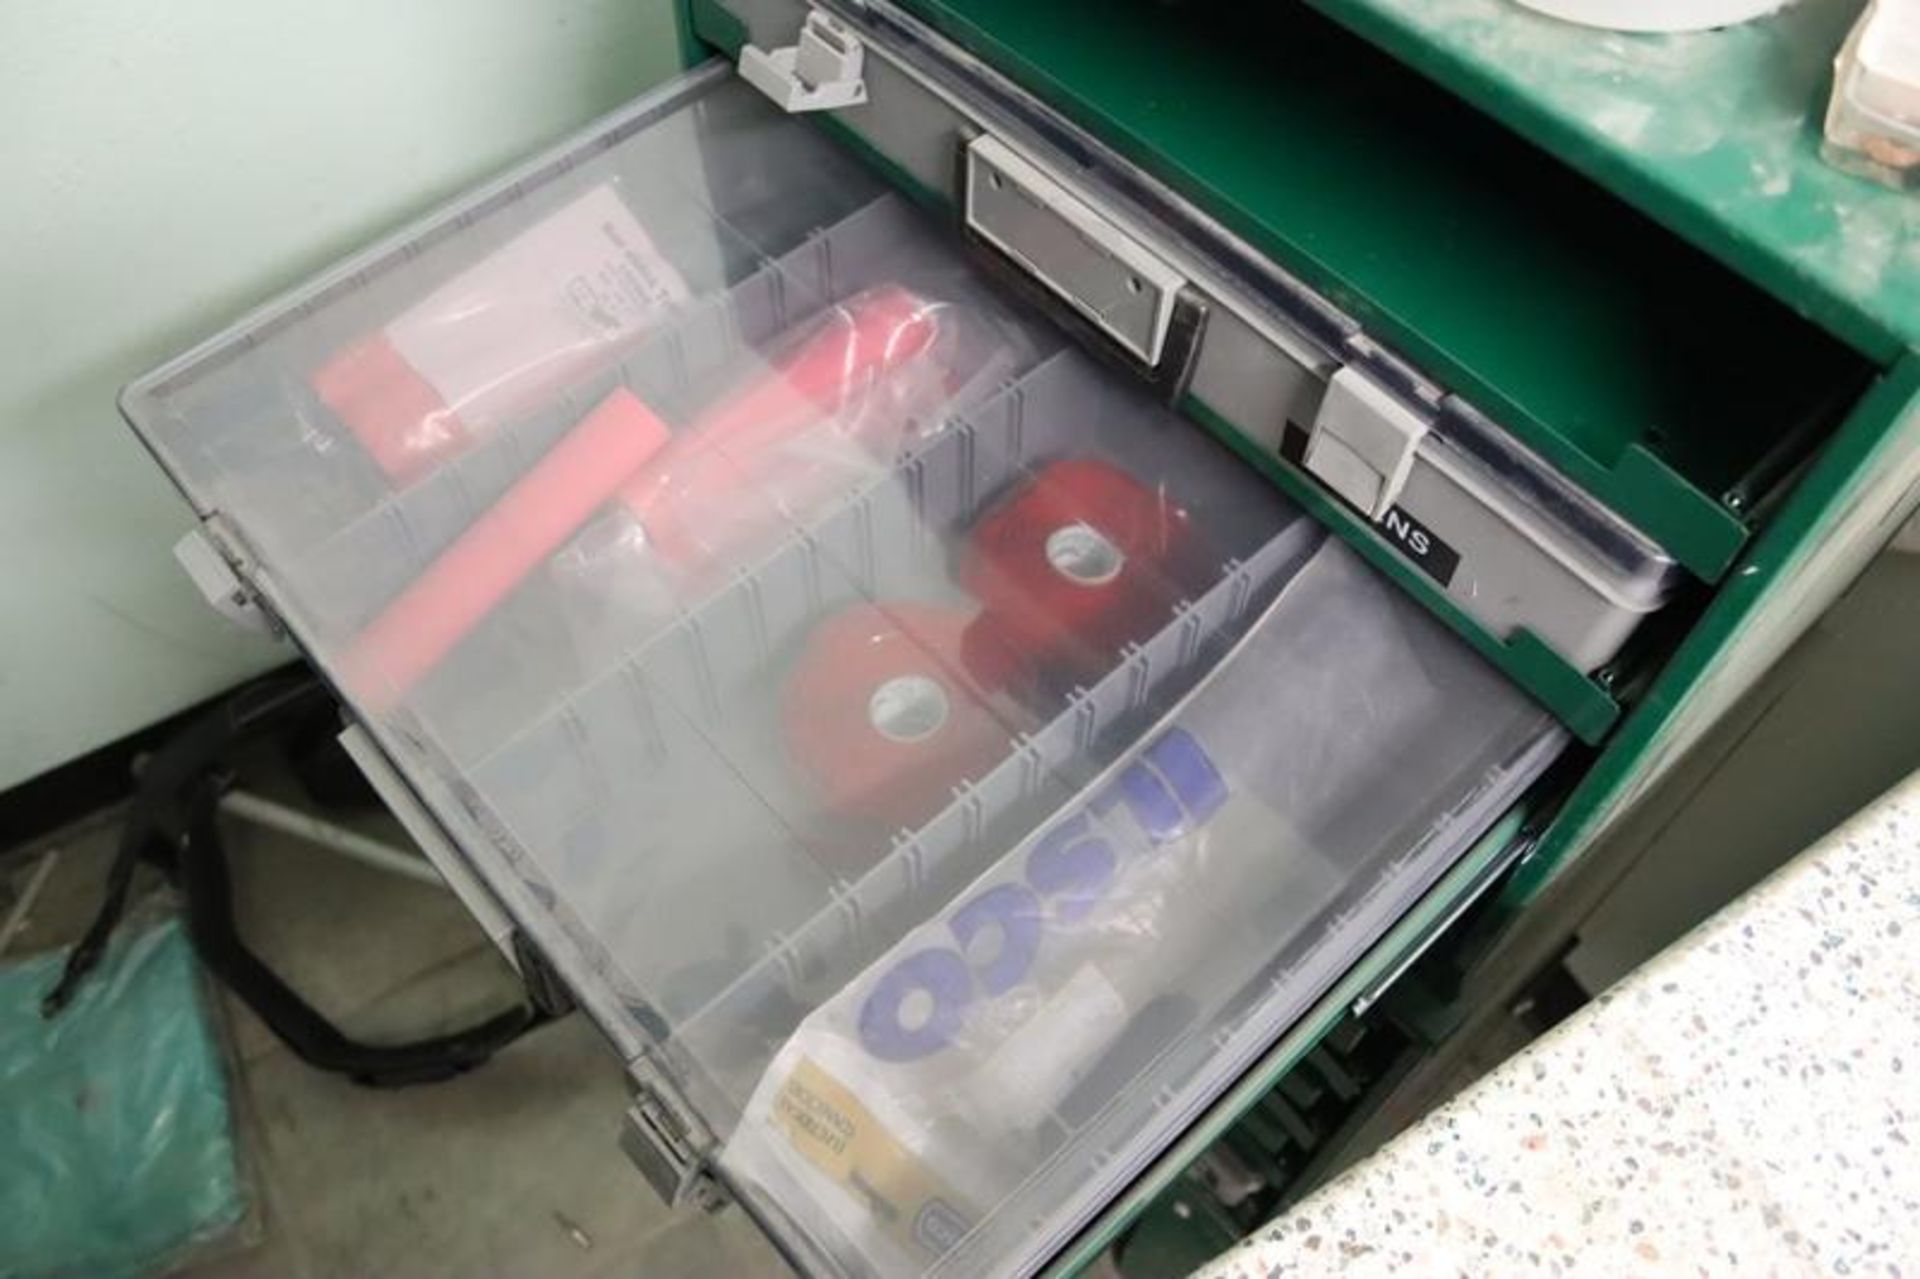 Wall Mounted Bin Unit with Bins and Contents, Misc. On Peg Board, Grease Guns, Stream Lights, 8-Draw - Image 17 of 23